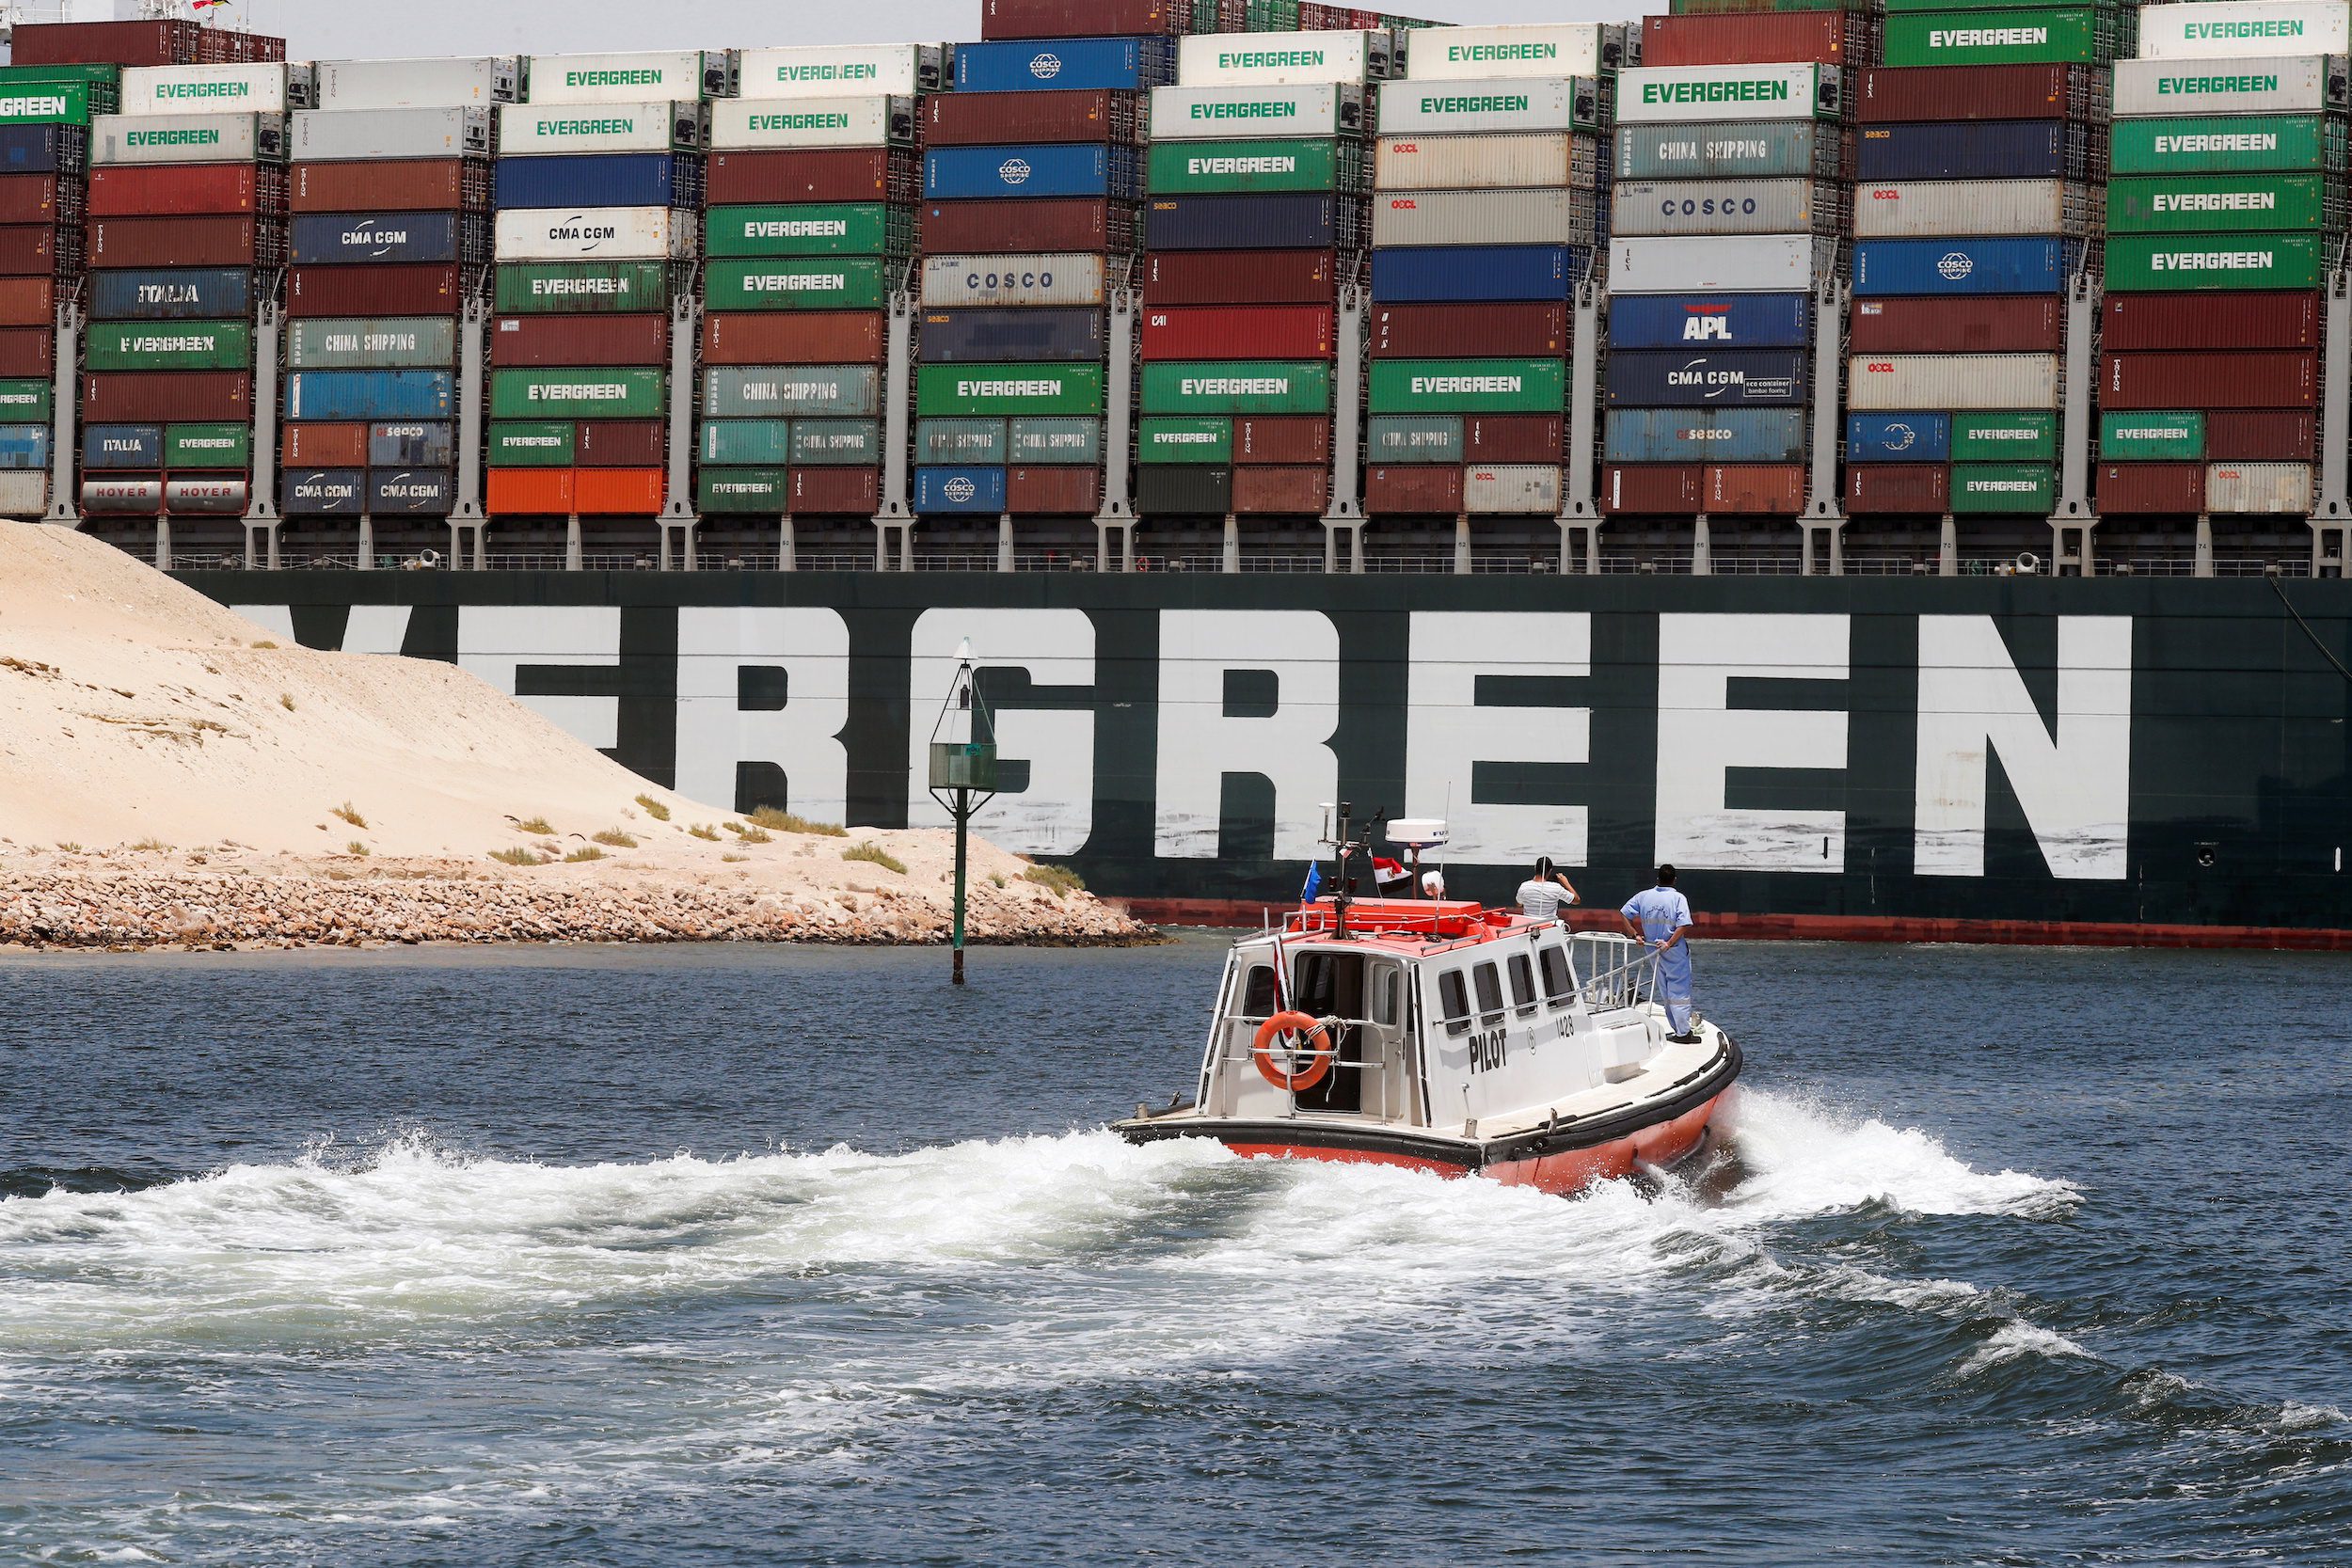 Ship Ever Given Departs Suez Canal with Pilot Boat